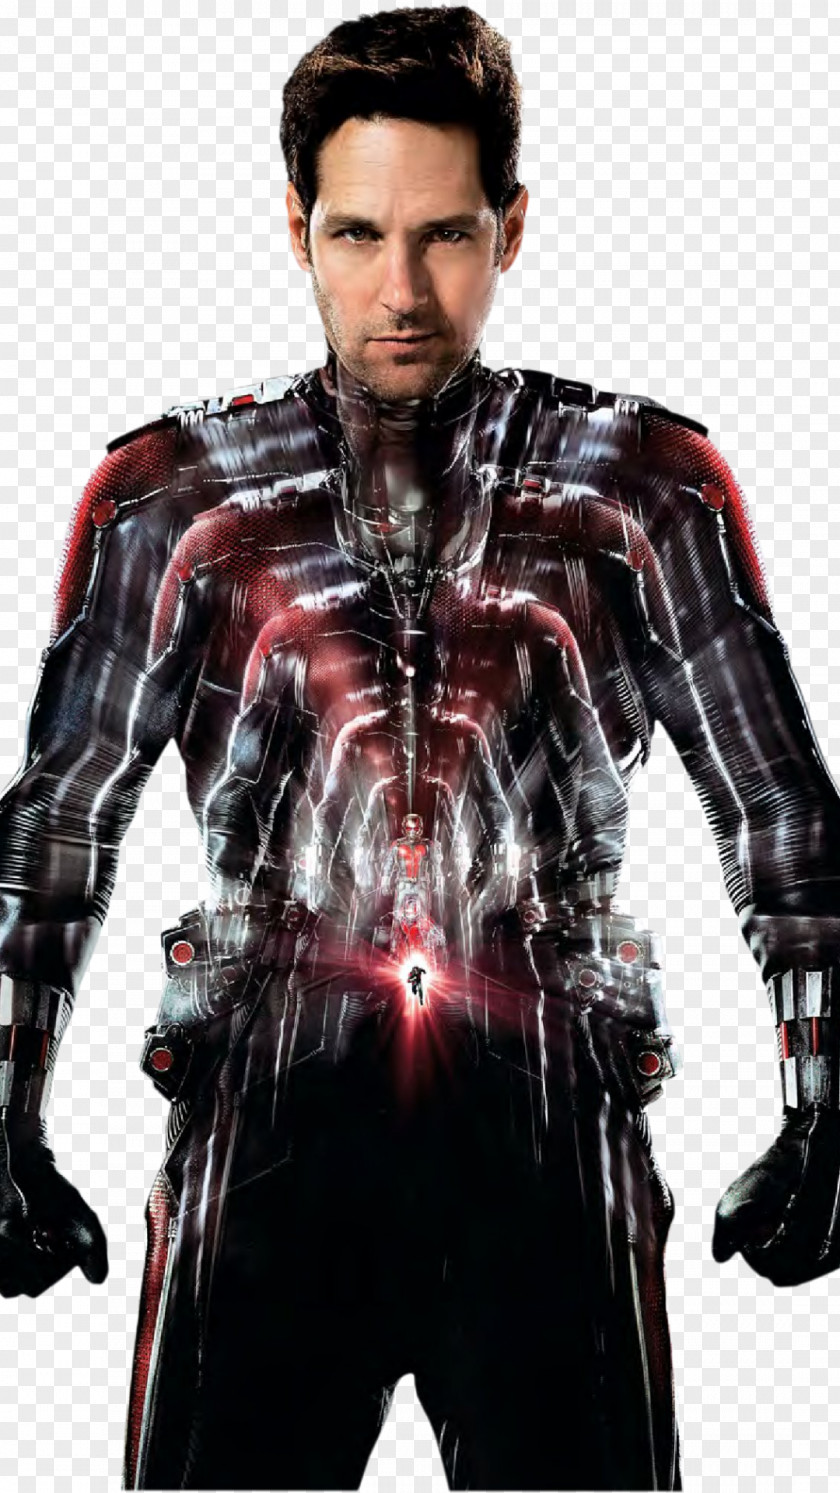 Ant Man Paul Rudd Ant-Man Hank Pym Wasp Marvel Cinematic Universe PNG